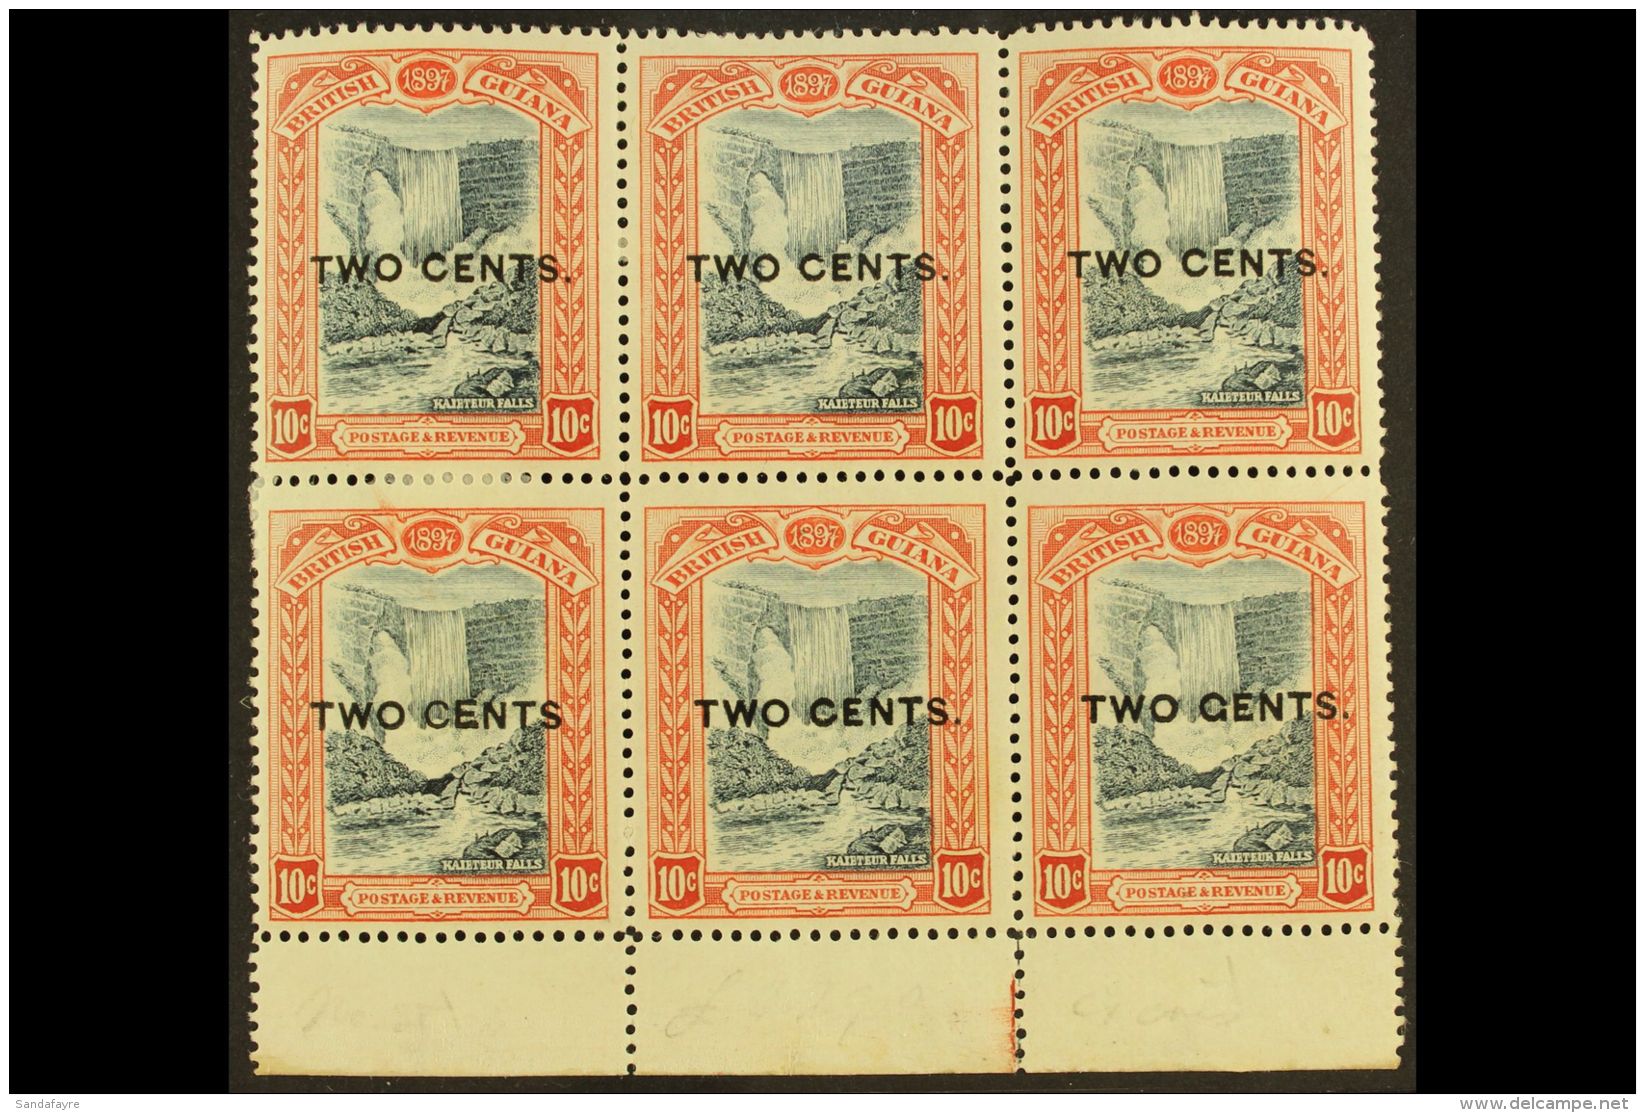 1899 POSITIONAL VARIETIES BLOCK 1899 2c On 10c Kaiteur Falls With NO STOP AFTER "CENTS" Variety, SG 223a, Plus... - Britisch-Guayana (...-1966)